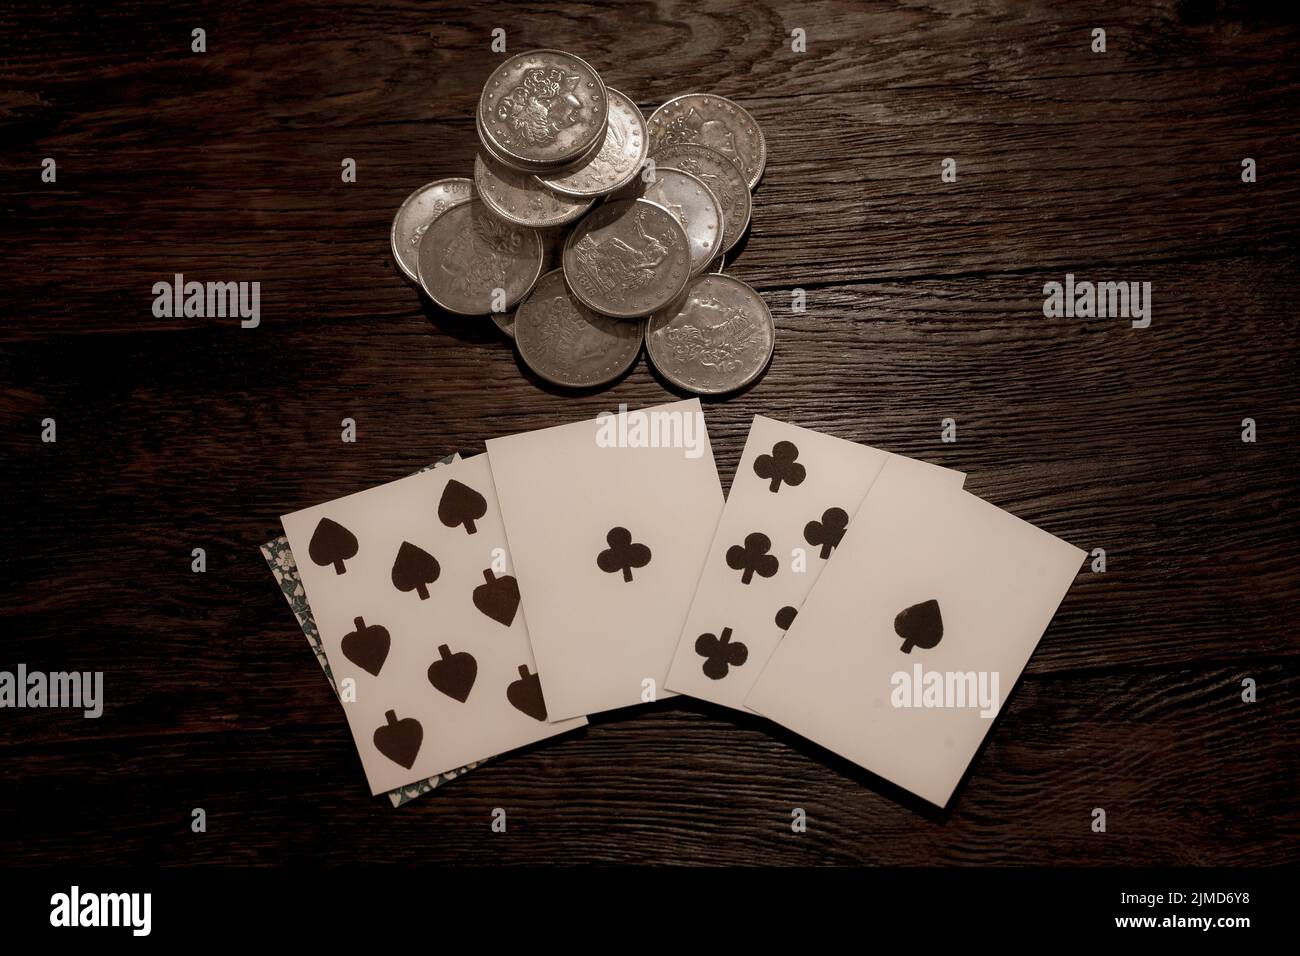 Wild west gambling. Dead man's hand and silver coins bet. Two-pair poker hand consisting of the black aces and black eights, held by Old West folk her Stock Photo